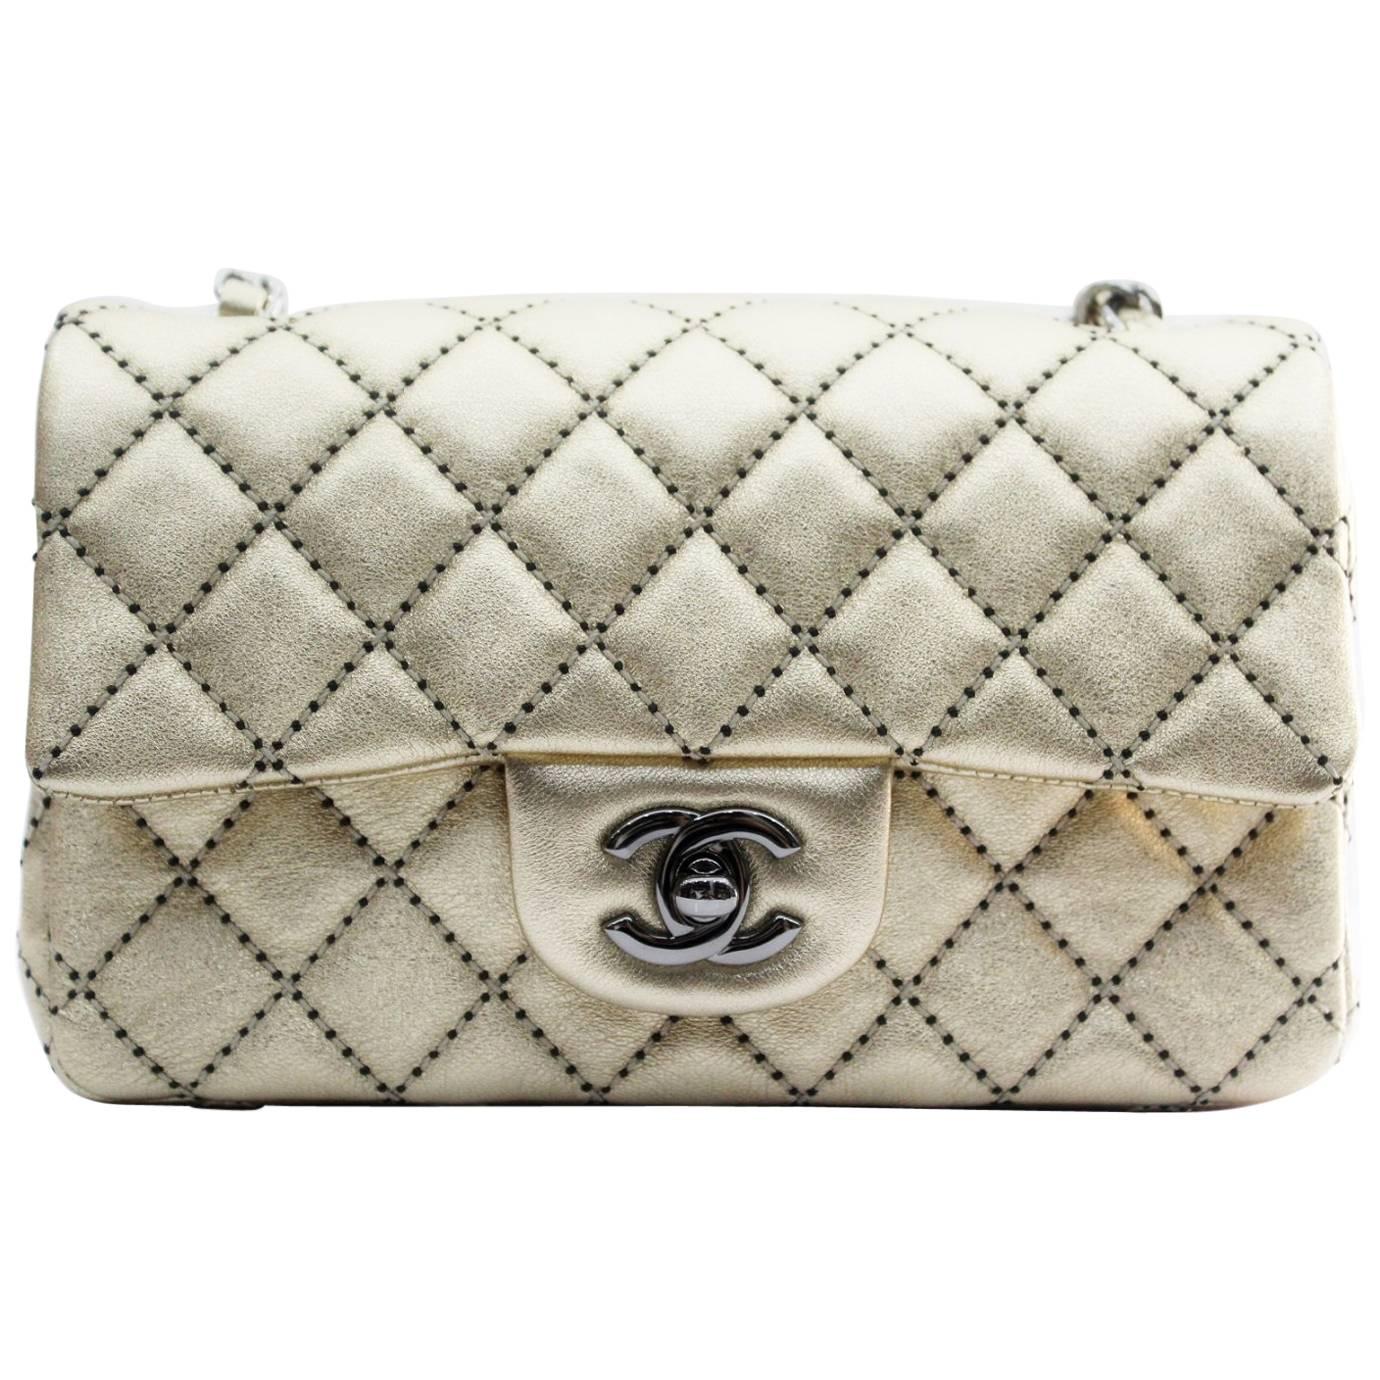 Chanel Gold / Black Quilted Lambskin Leather Mini Flap Bag